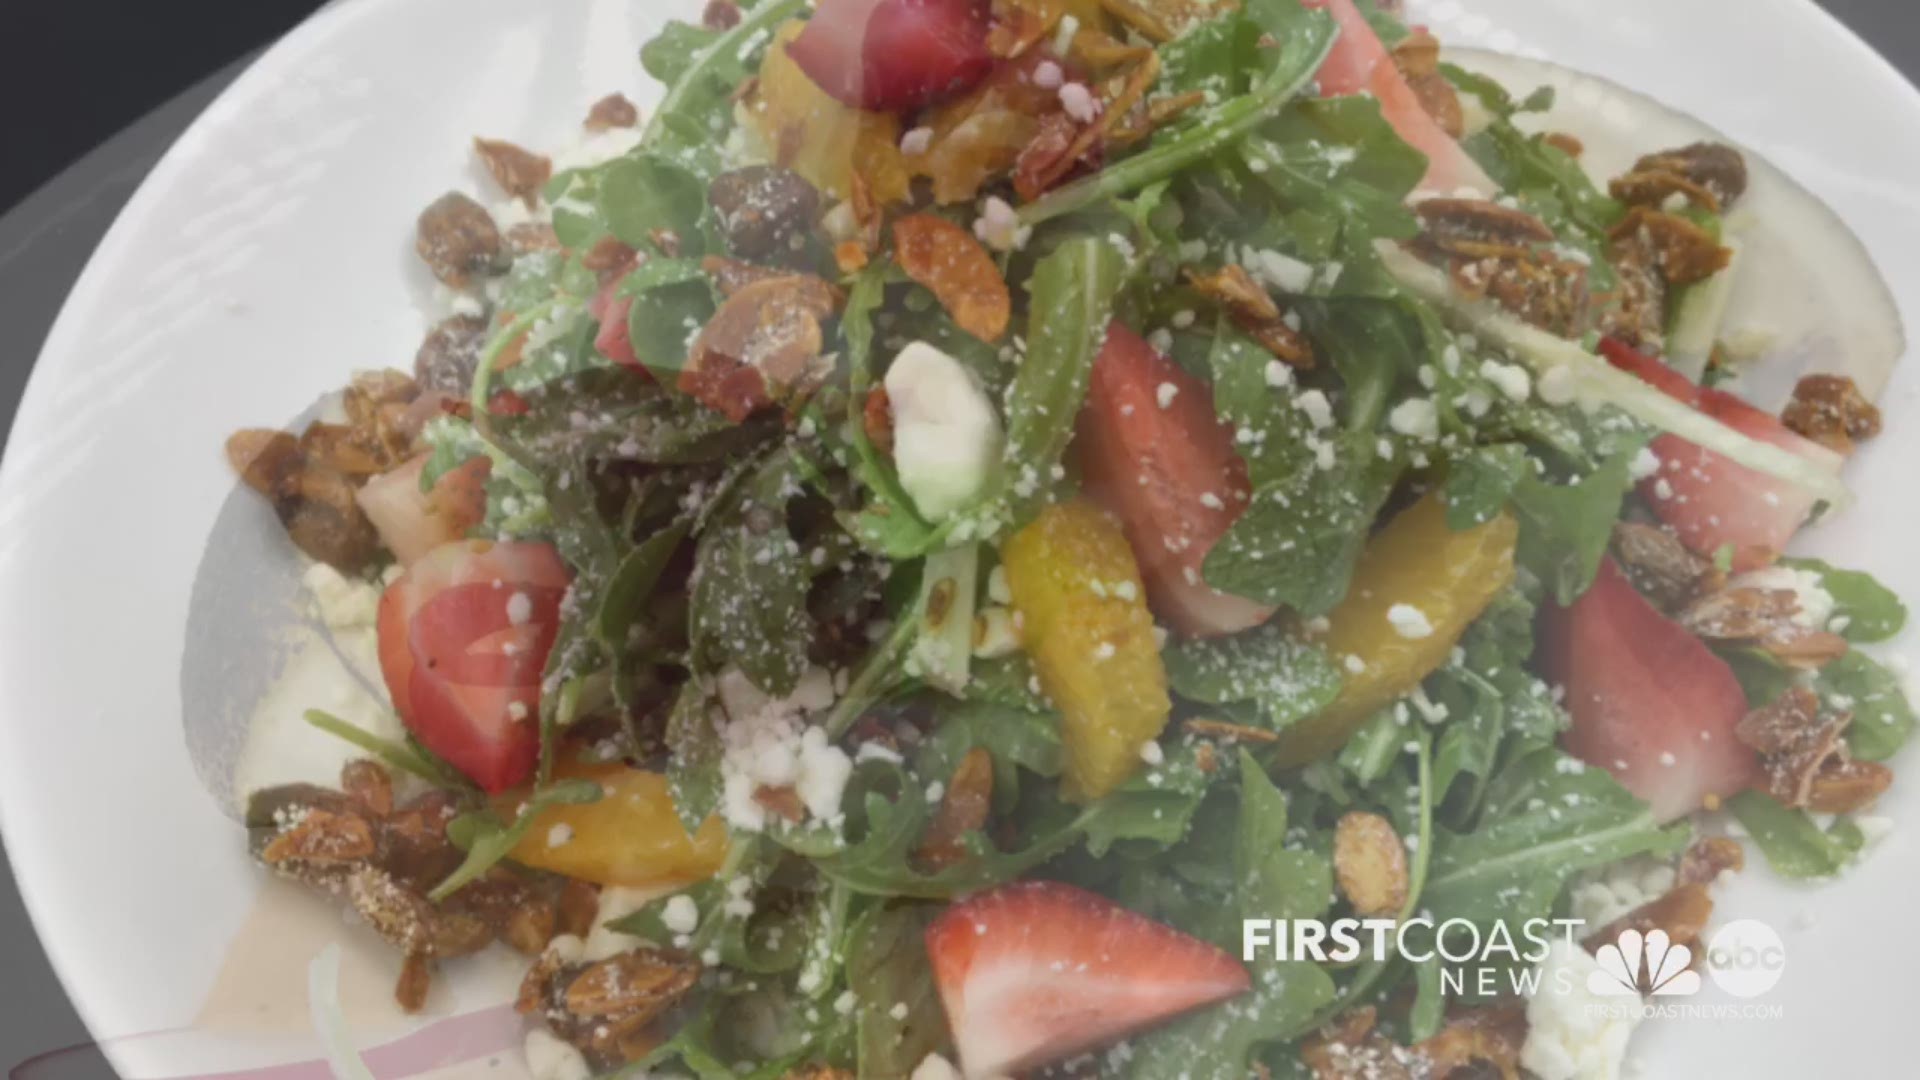 First Coast Foodies got a sneak peek at the new menu items added to Bellwether's summer menu. The new menu consists of a summer salad, duck with mushroom risotto and poached shrimp. The desserts are also a treat, one taking a twist on Asian fare!